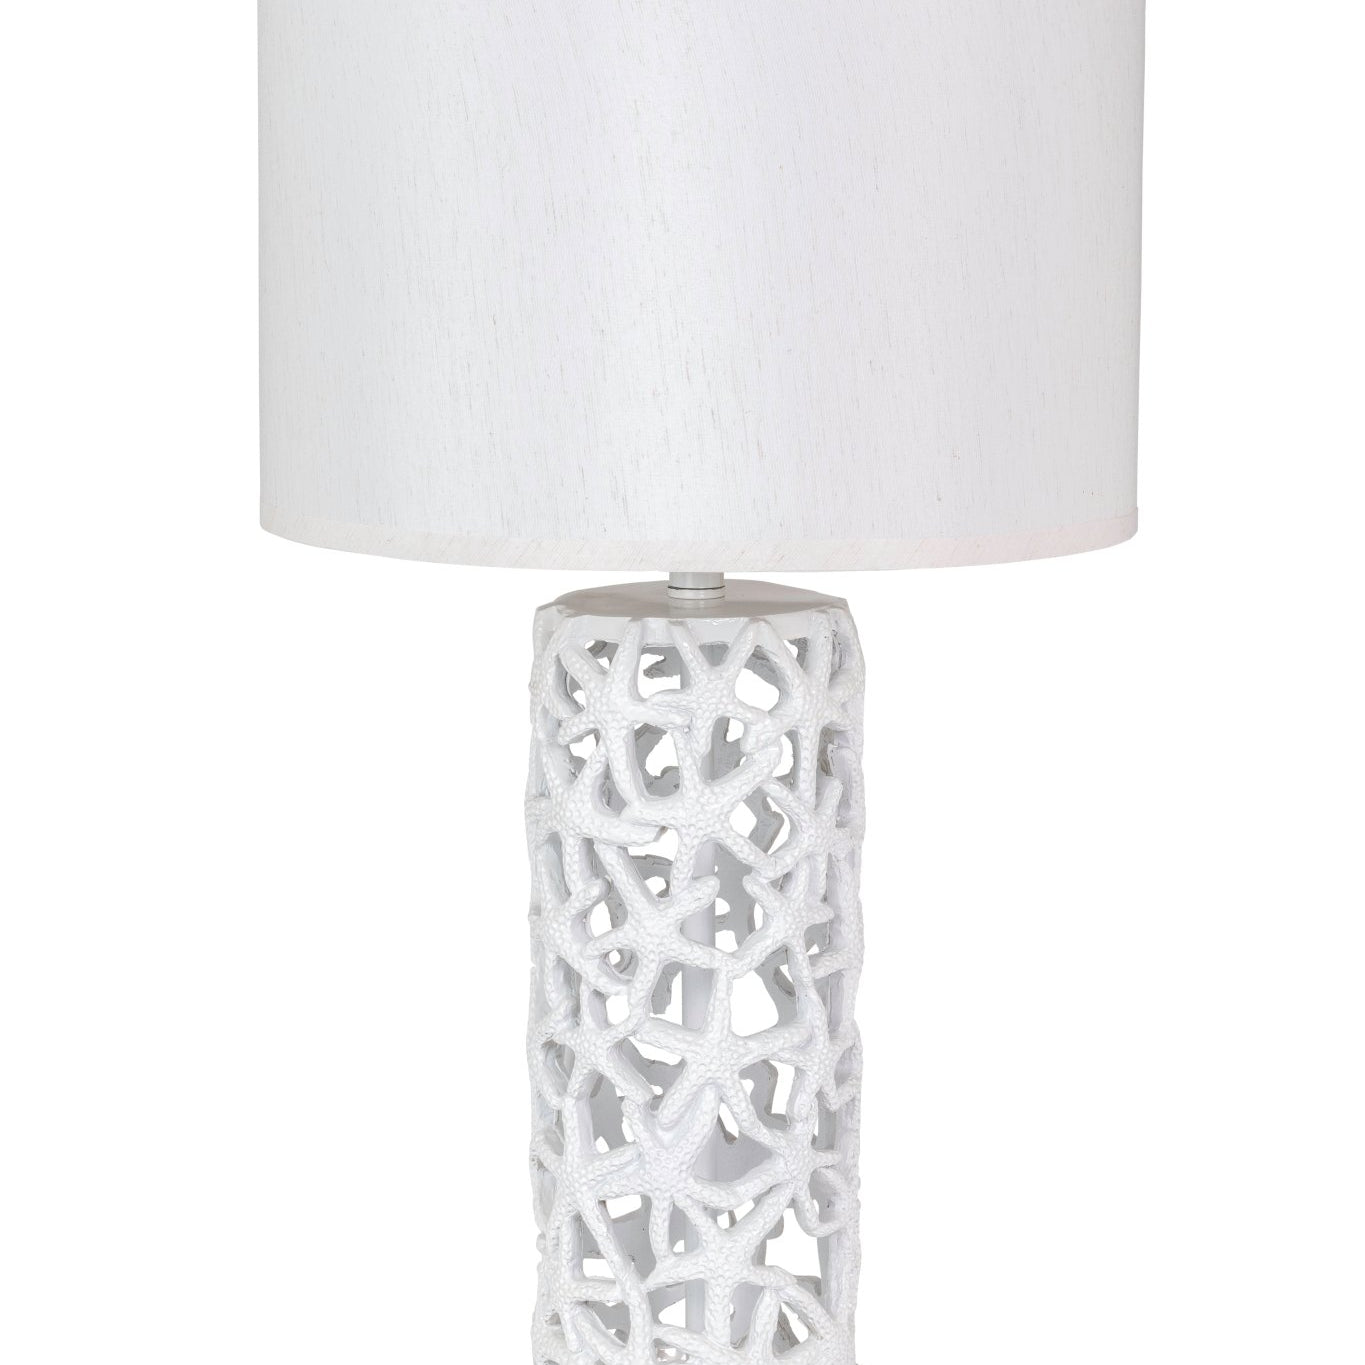 Darla 30" Poly Star Table Lamp -White, (Set of 2) - Table Lamps